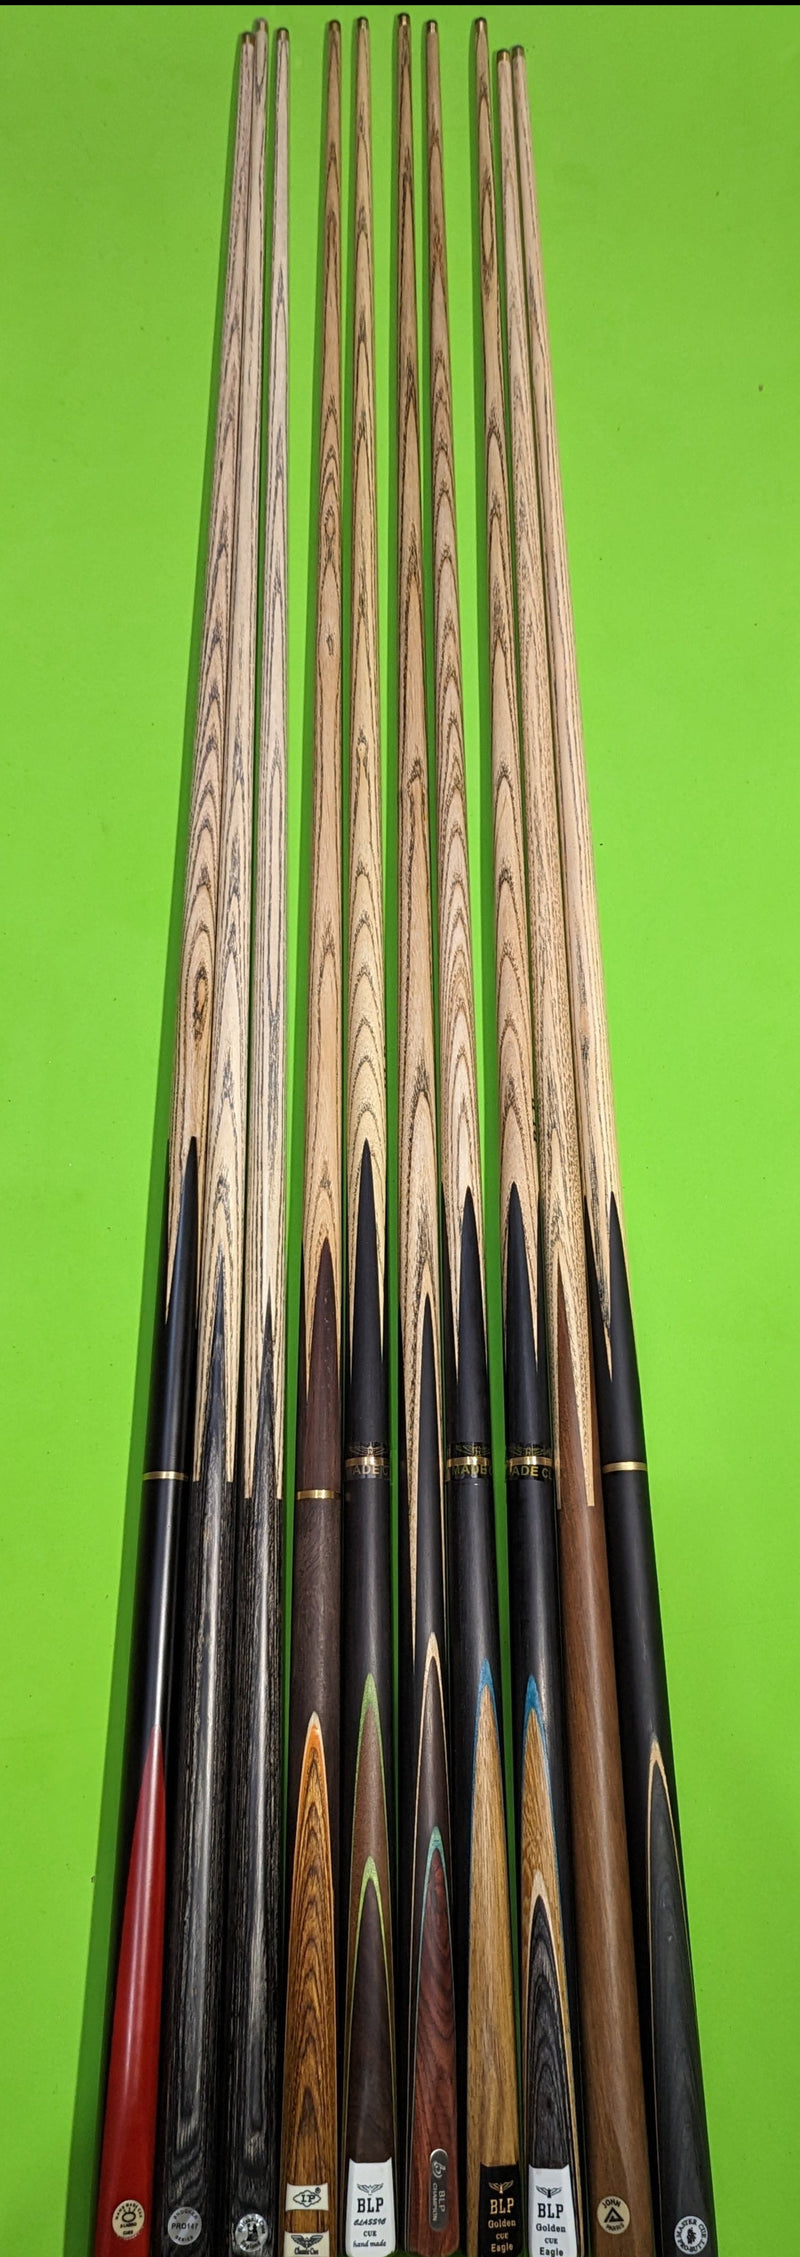 Snooker Cues One Piece and Three piece - Select Your Own (Read Description) Tango Sports